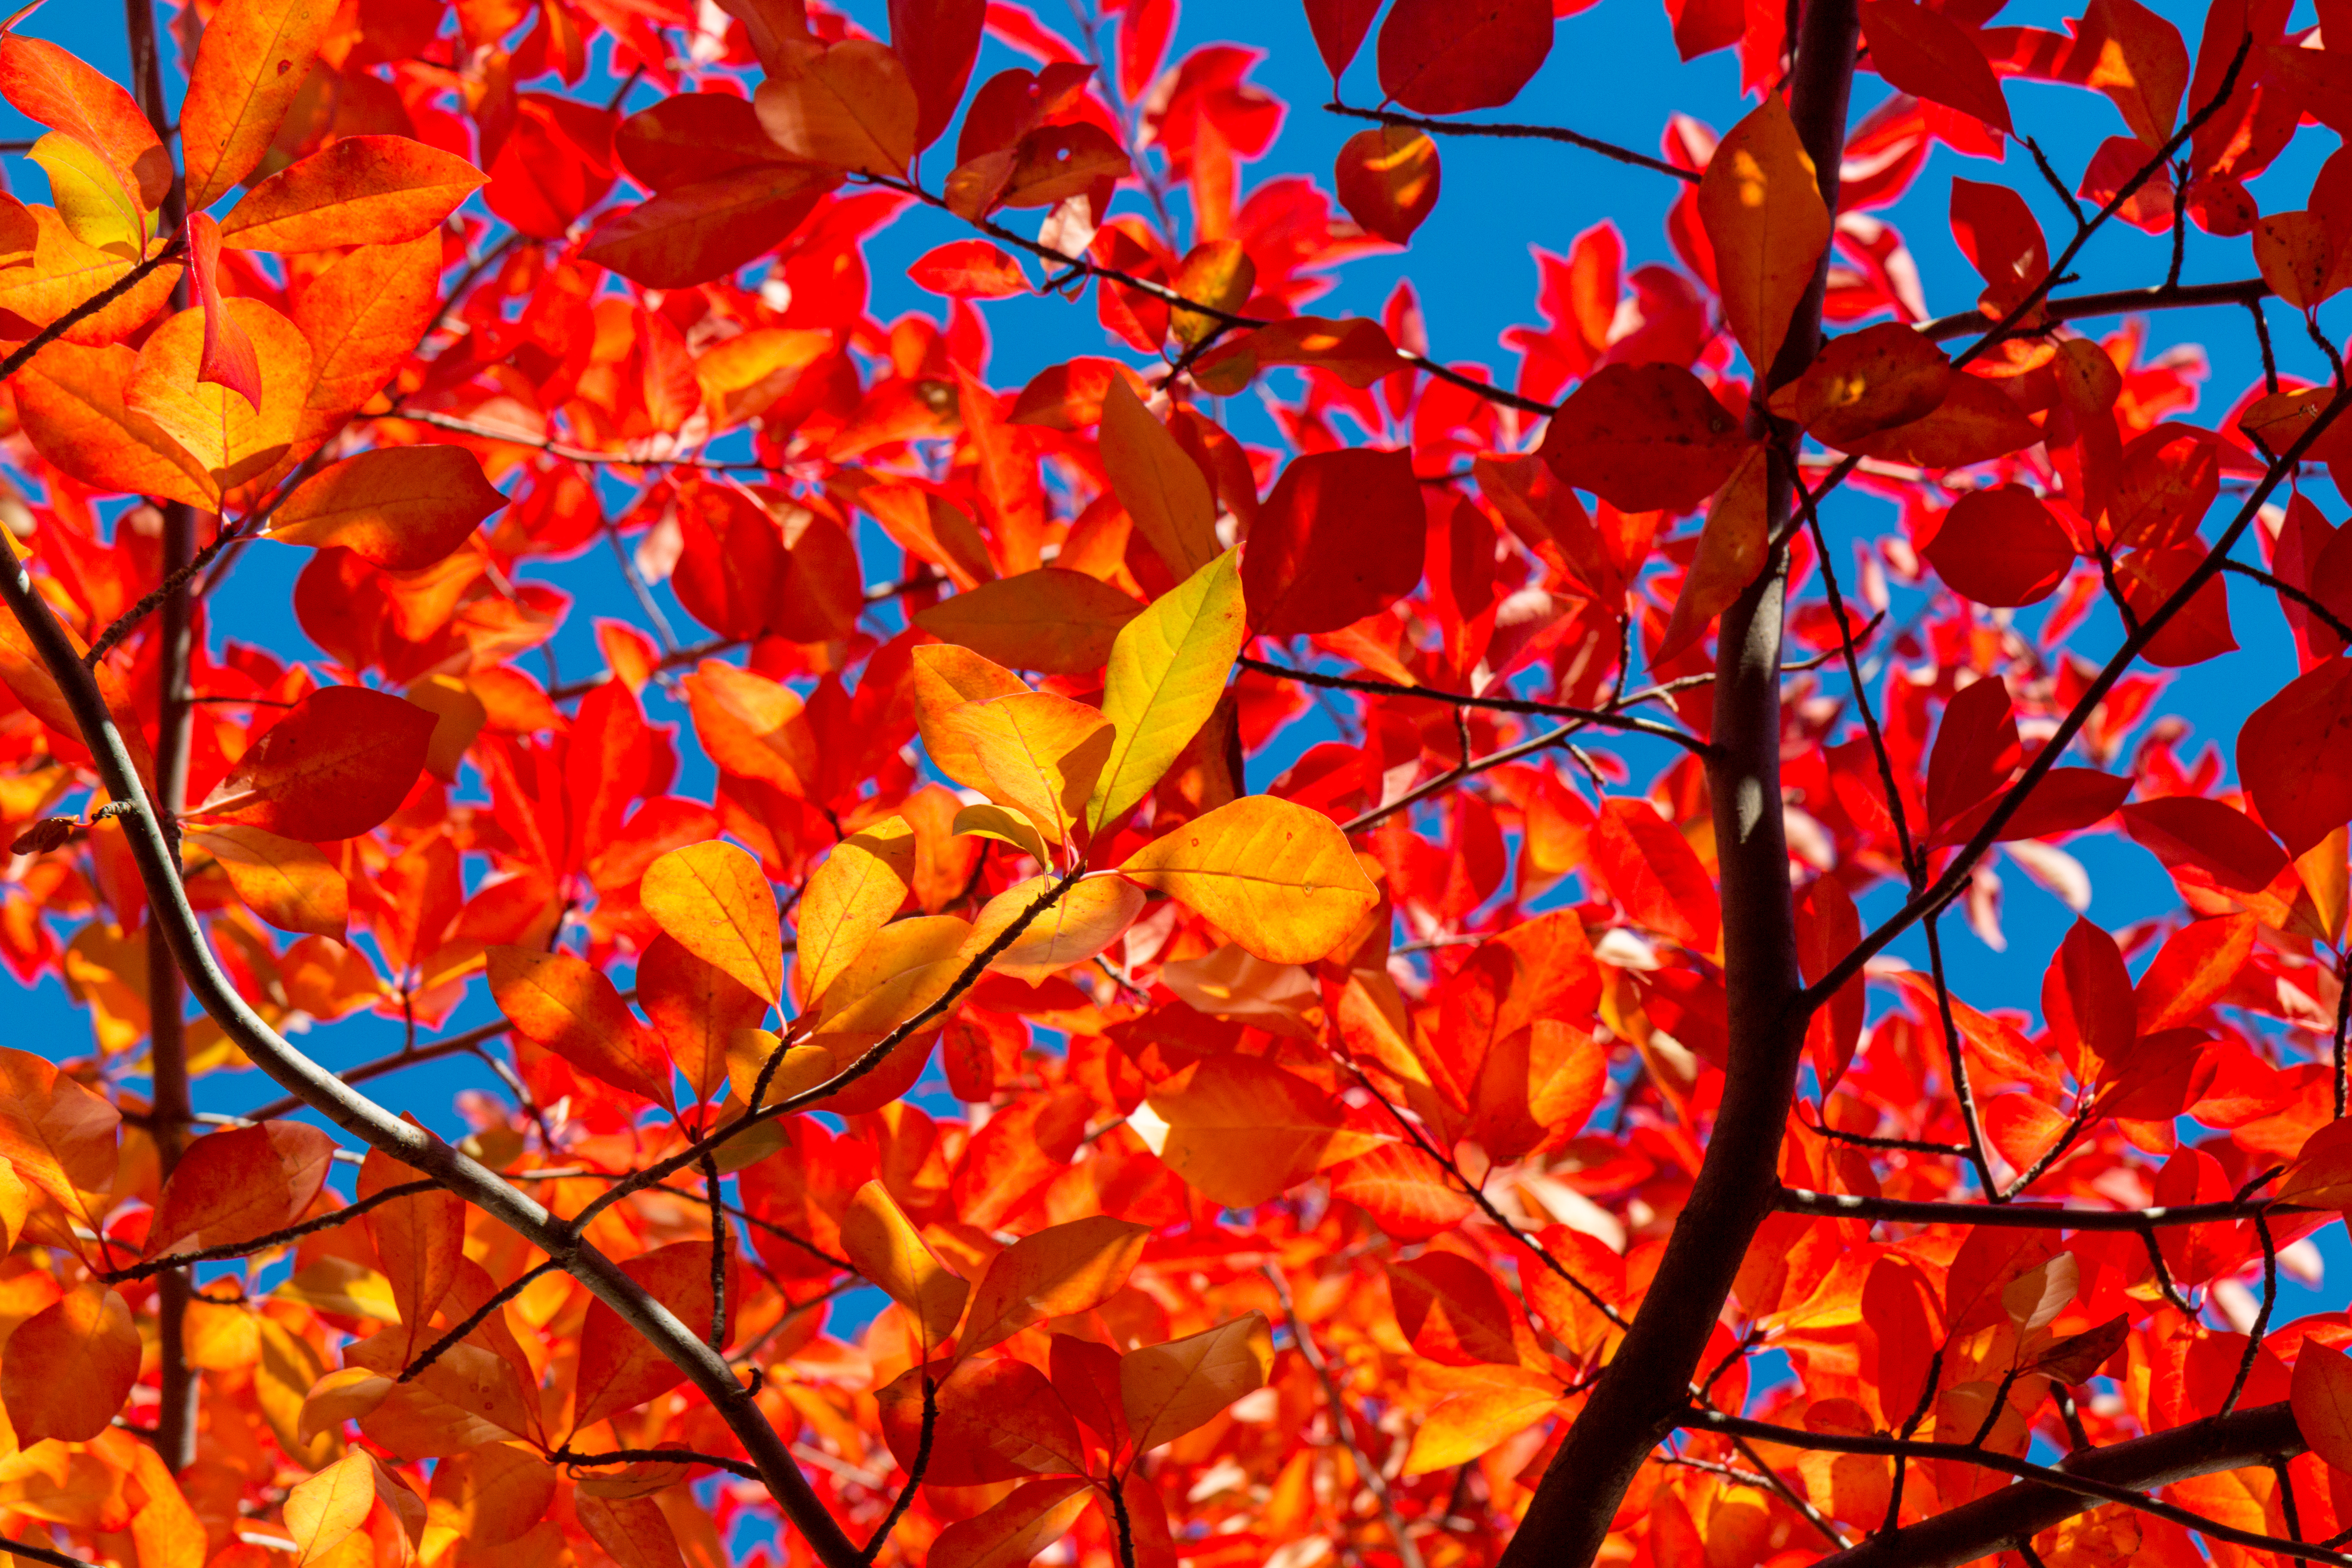 solar, branches, nature, autumn collection of HD images